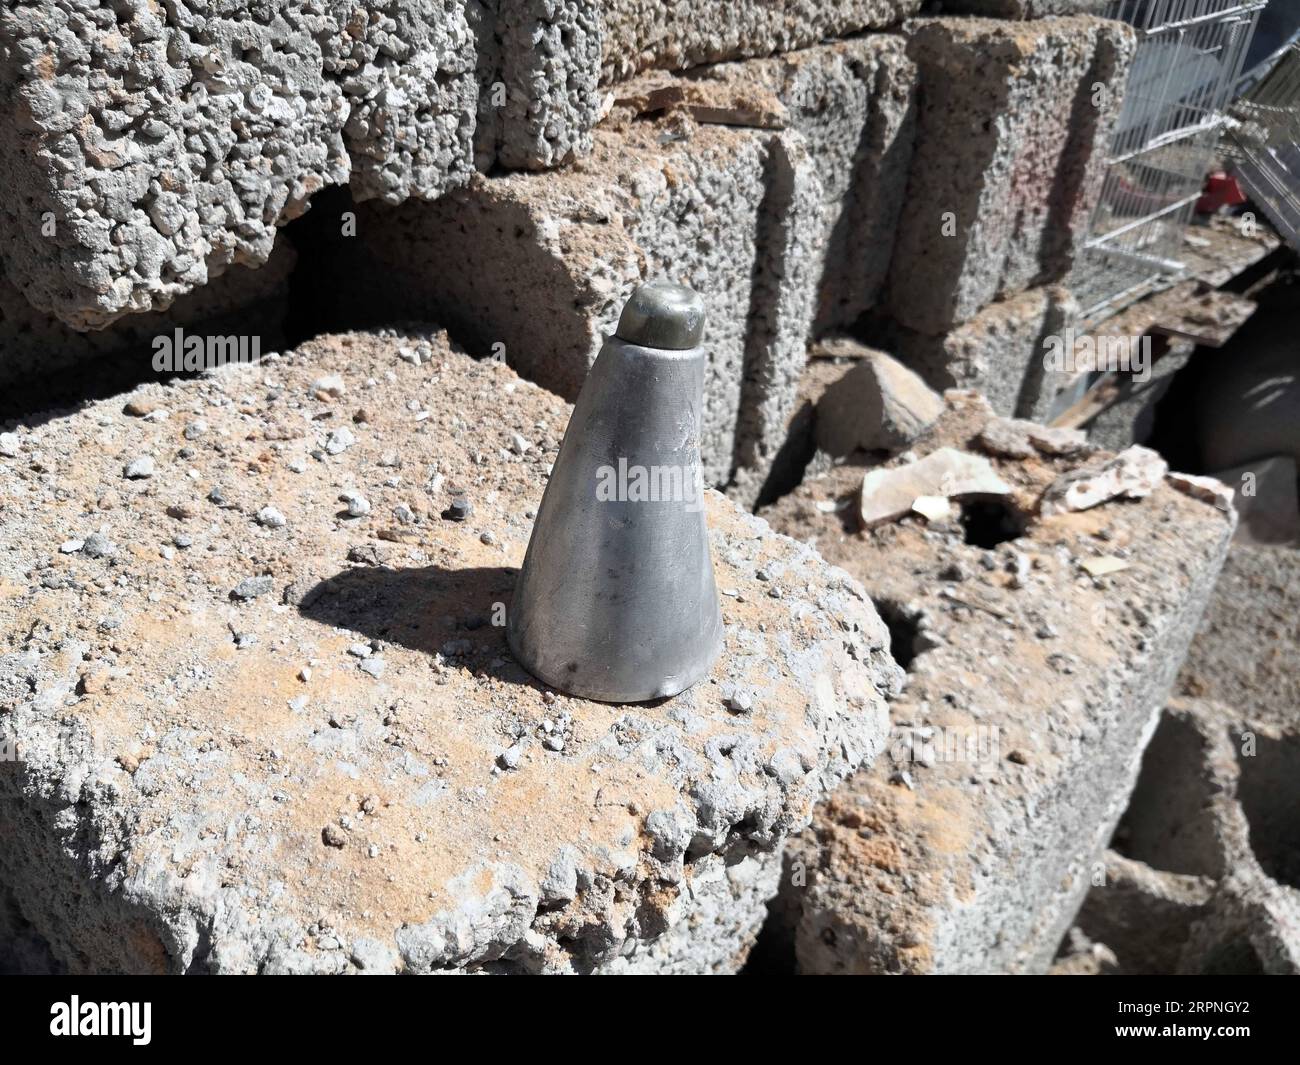 200228 -- TRIPOLI, Feb. 28, 2020 Xinhua -- A large piece of the missile is seen in a destroyed house in Abu Salim, southern Tripoli, Libya, Feb. 28, 2020. The forces of the UN-backed Libyan government said on Friday that the rival east-based army attacked the Mitiga International Airport in Tripoli with heavy shelling. Haftar commander of the east-based army targeted the Mitiga Airport and its surroundings, as well as a number of residential neighborhoods in the capital Tripoli, with more than 60 Grad missiles, the UN-backed government forces said in a statement. Photo by Hamza Turkia/Xinhua L Stock Photo